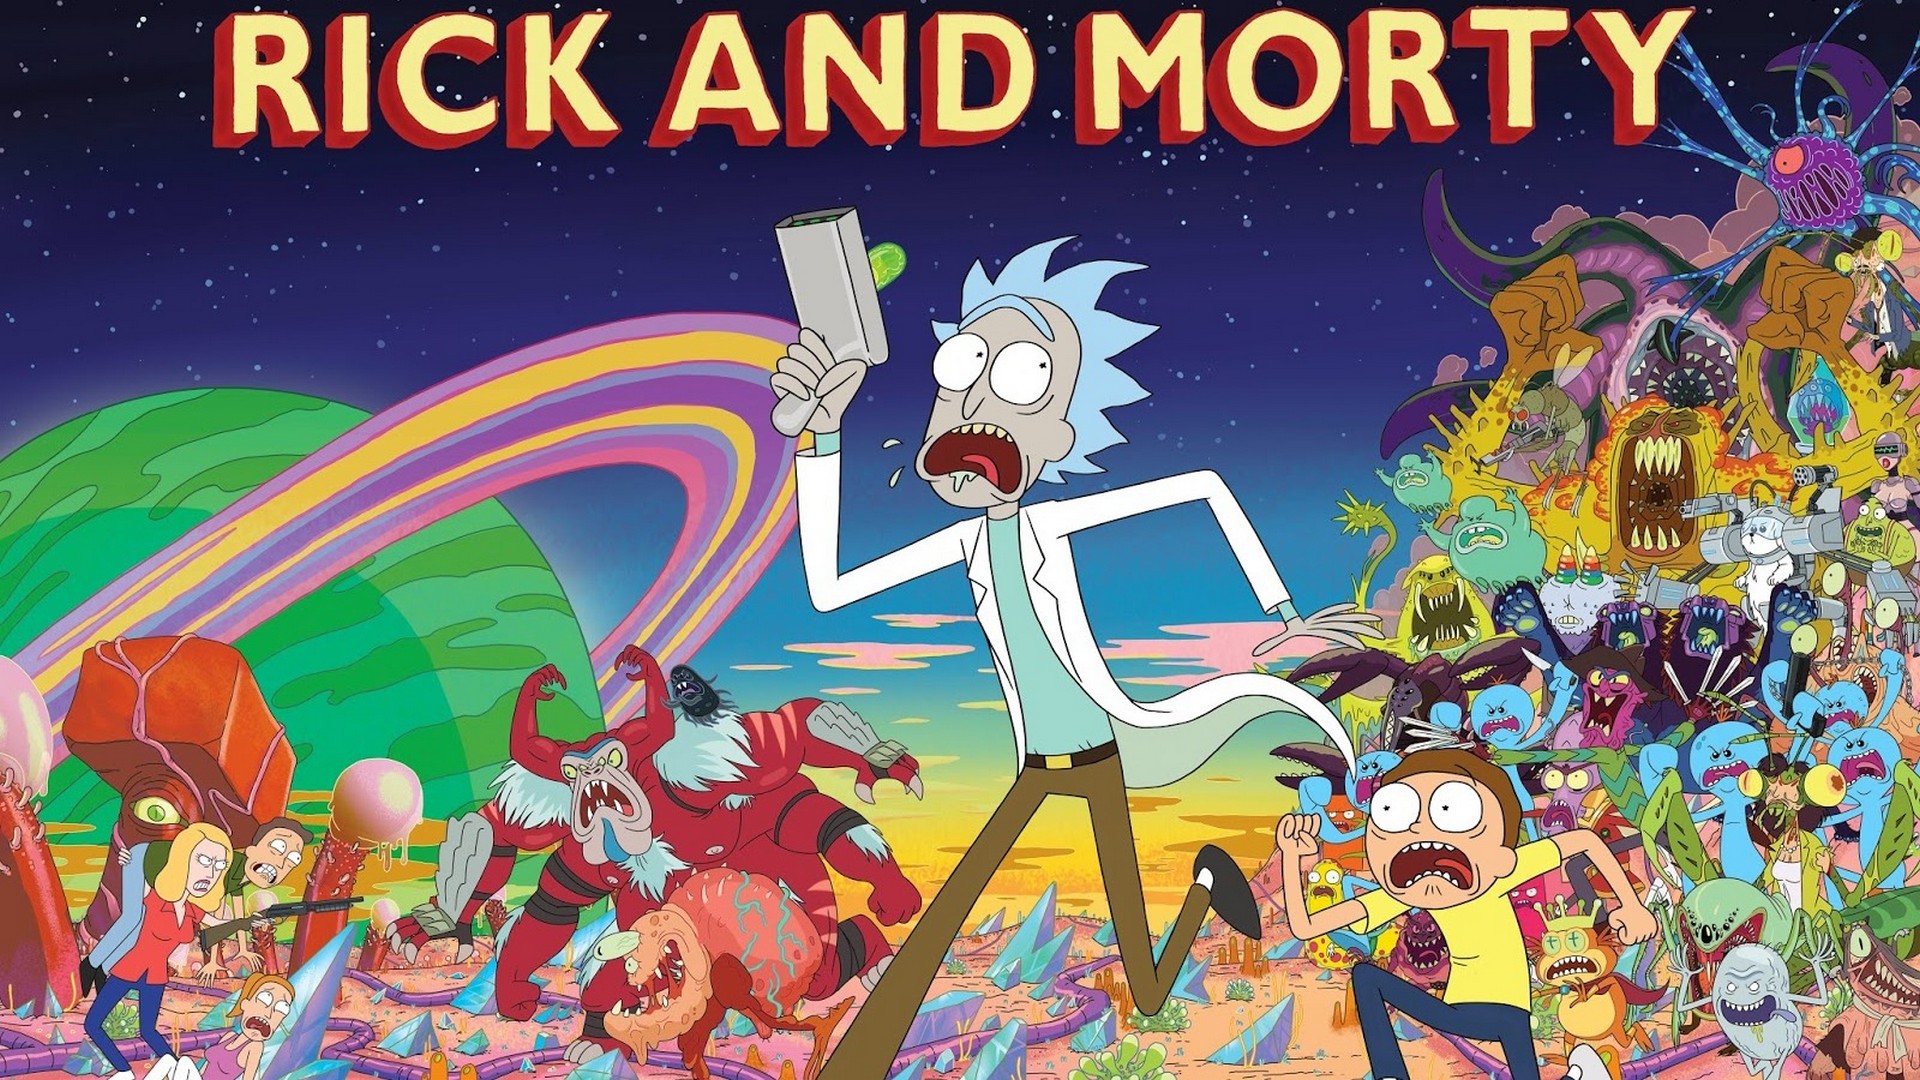 Computer Wallpapers Rick and Morty with resolution 1920X1080 pixel. You can use this wallpaper as background for your desktop Computer Screensavers, Android or iPhone smartphones